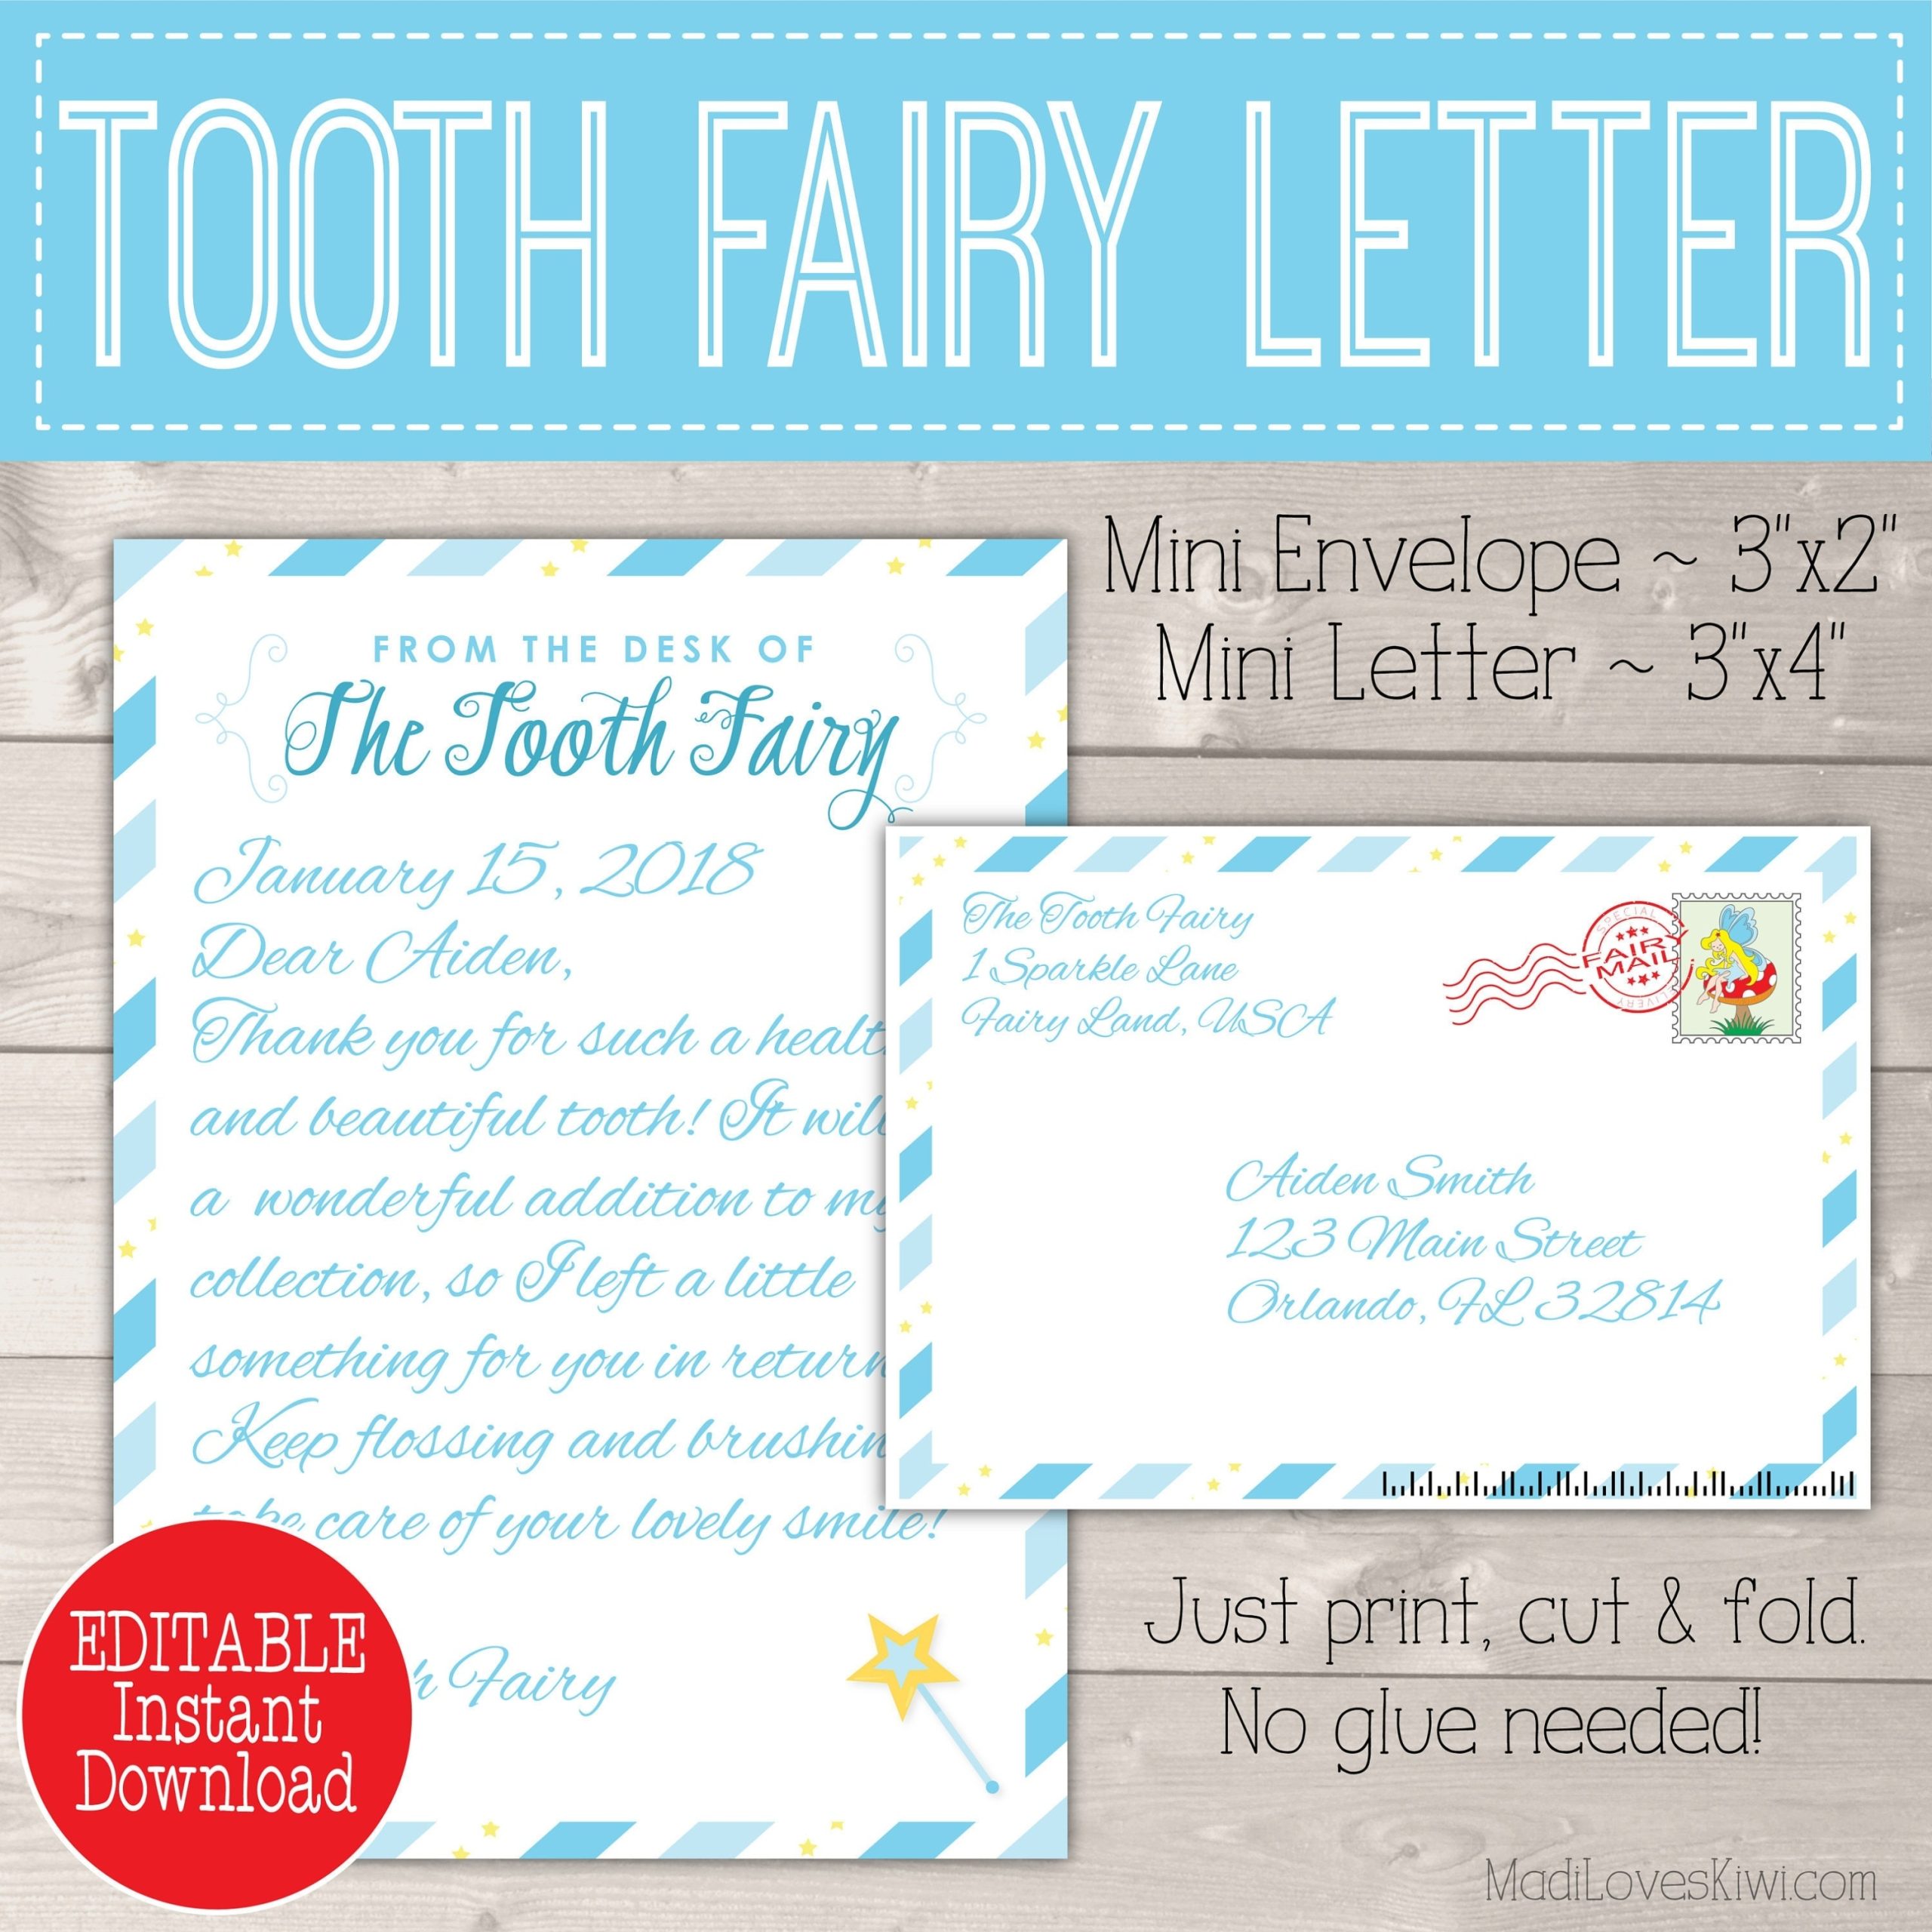 Printable Pdf Tooth Fairy Letter Tooth Fairy Letter Tooth Regarding For Tooth Fairy Letter Template